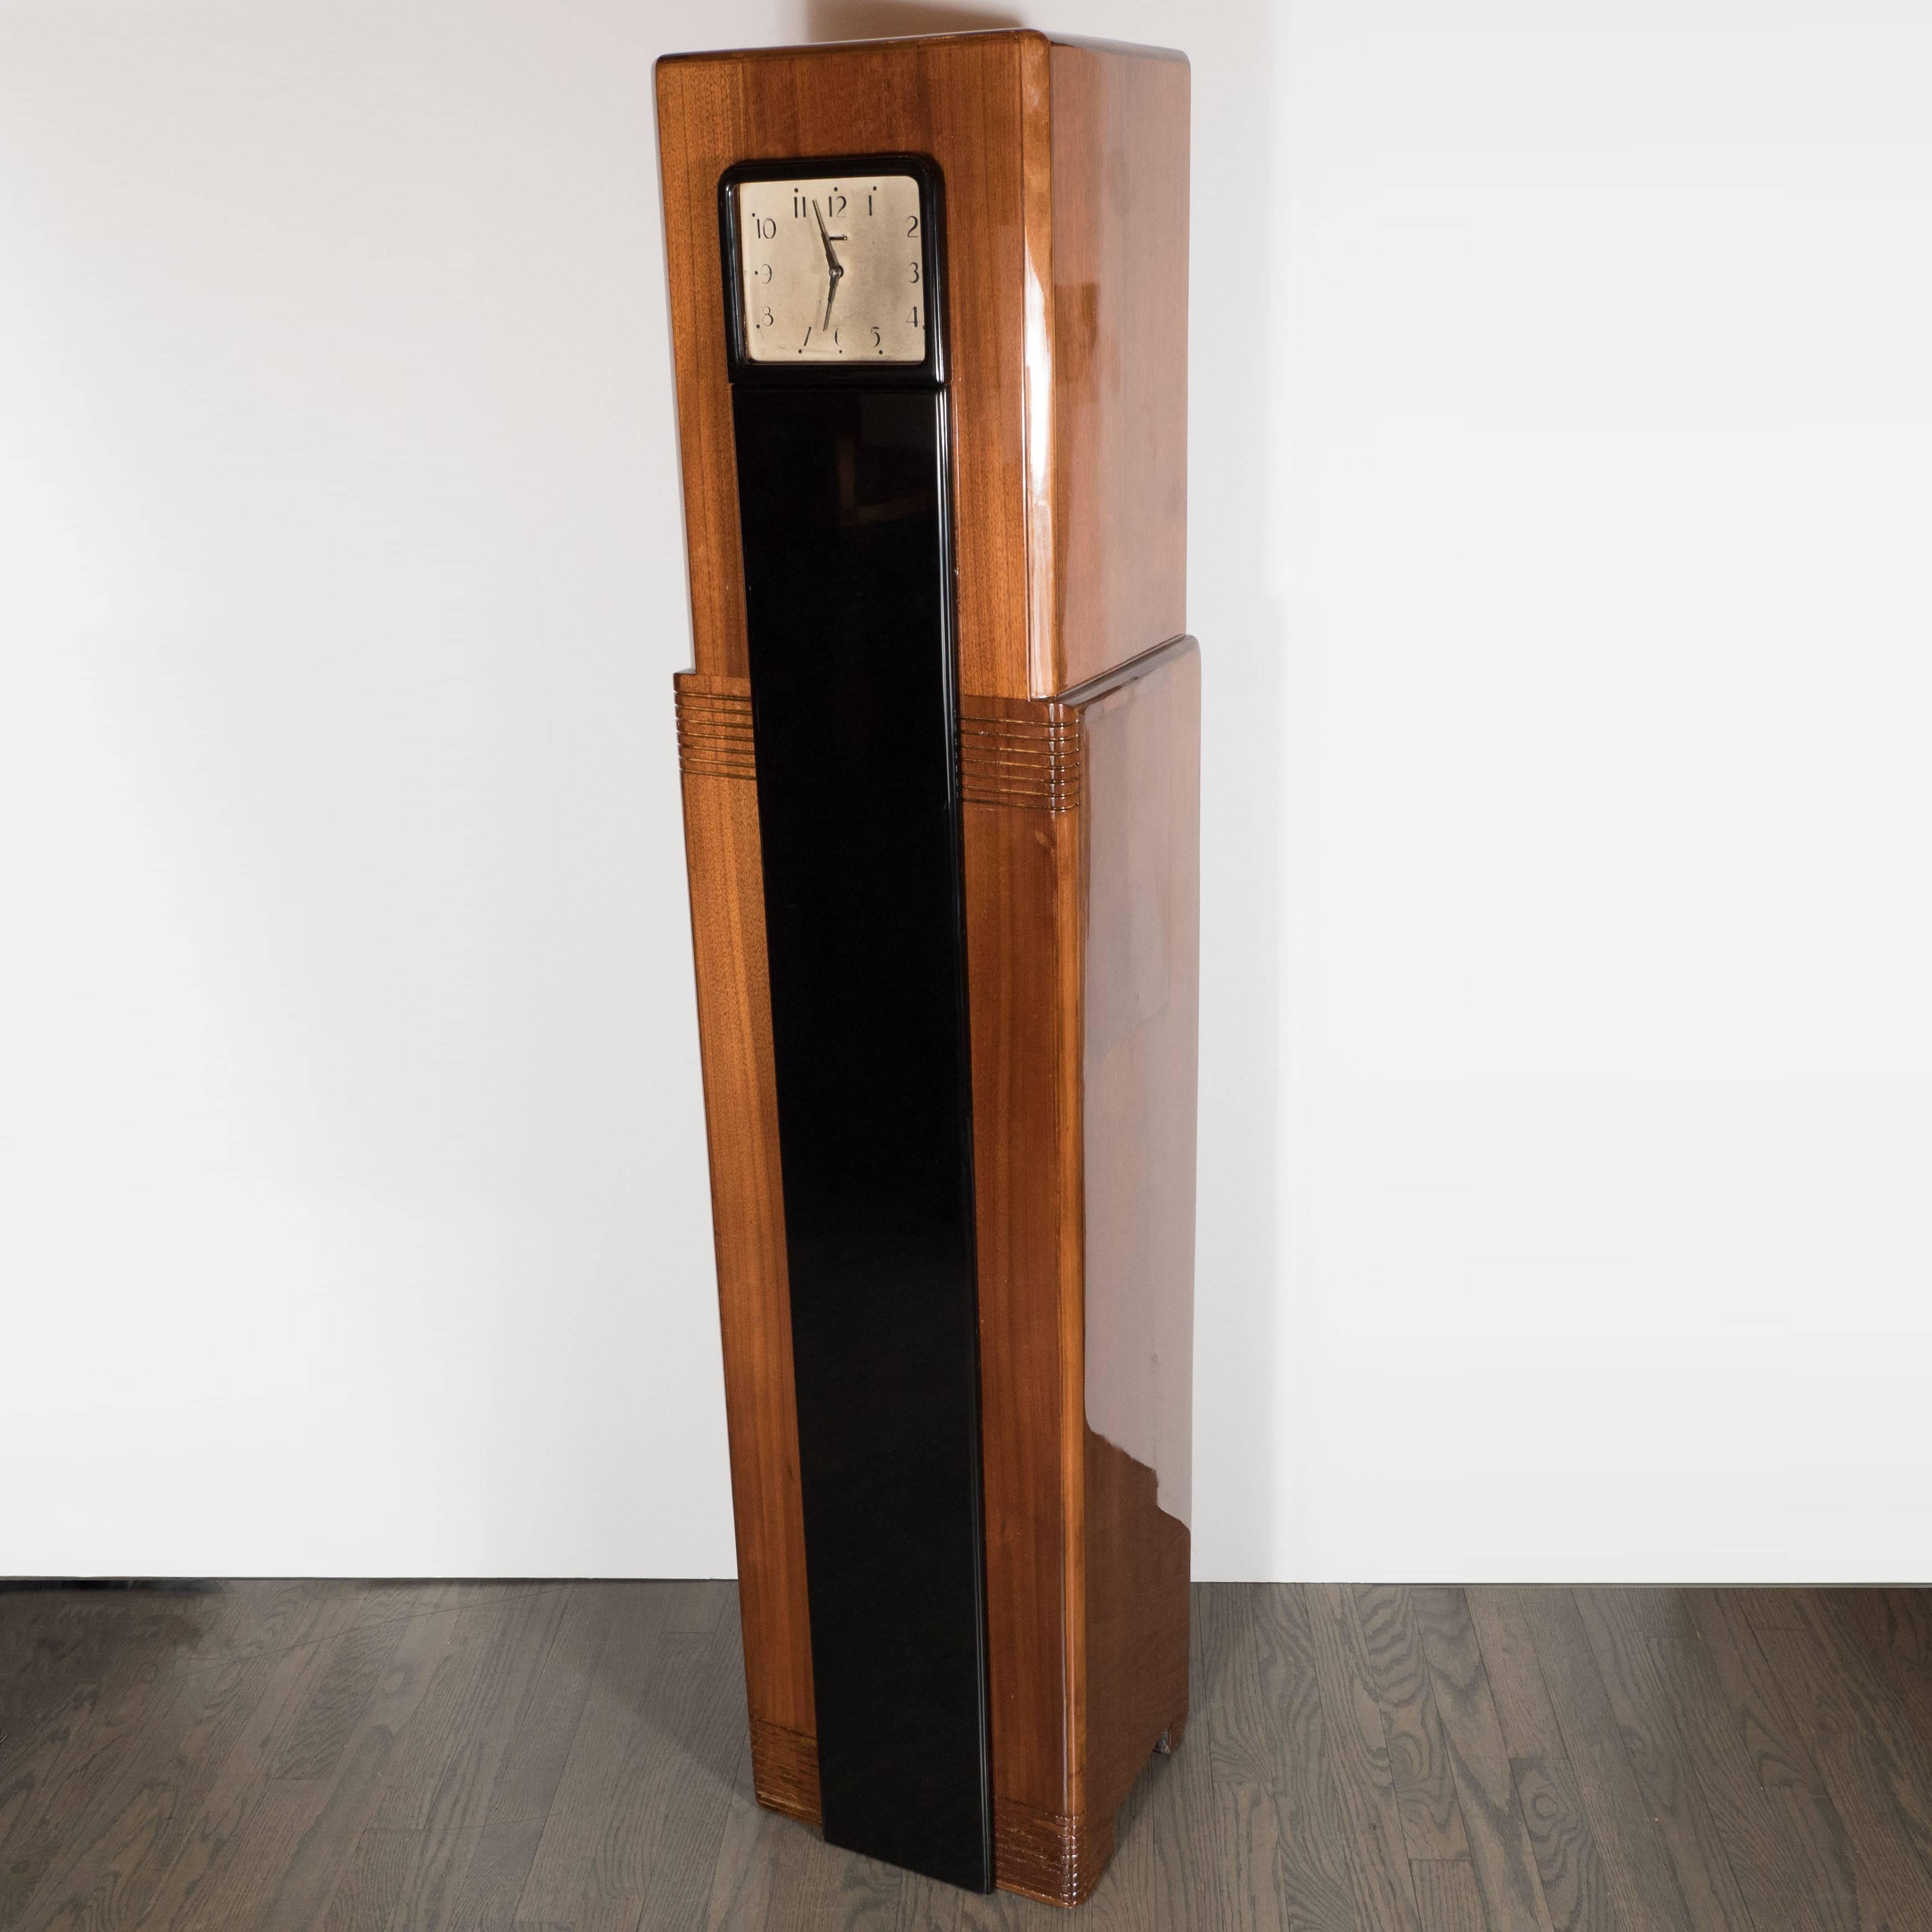 A streamlined American Art Deco skyscraper style grandfather clock in book-matched walnut and black lacquer, the streamlined clock case with typical linear recessed decoration in skyscraper style. 
The clockwork manufactured by famous Westinghouse,